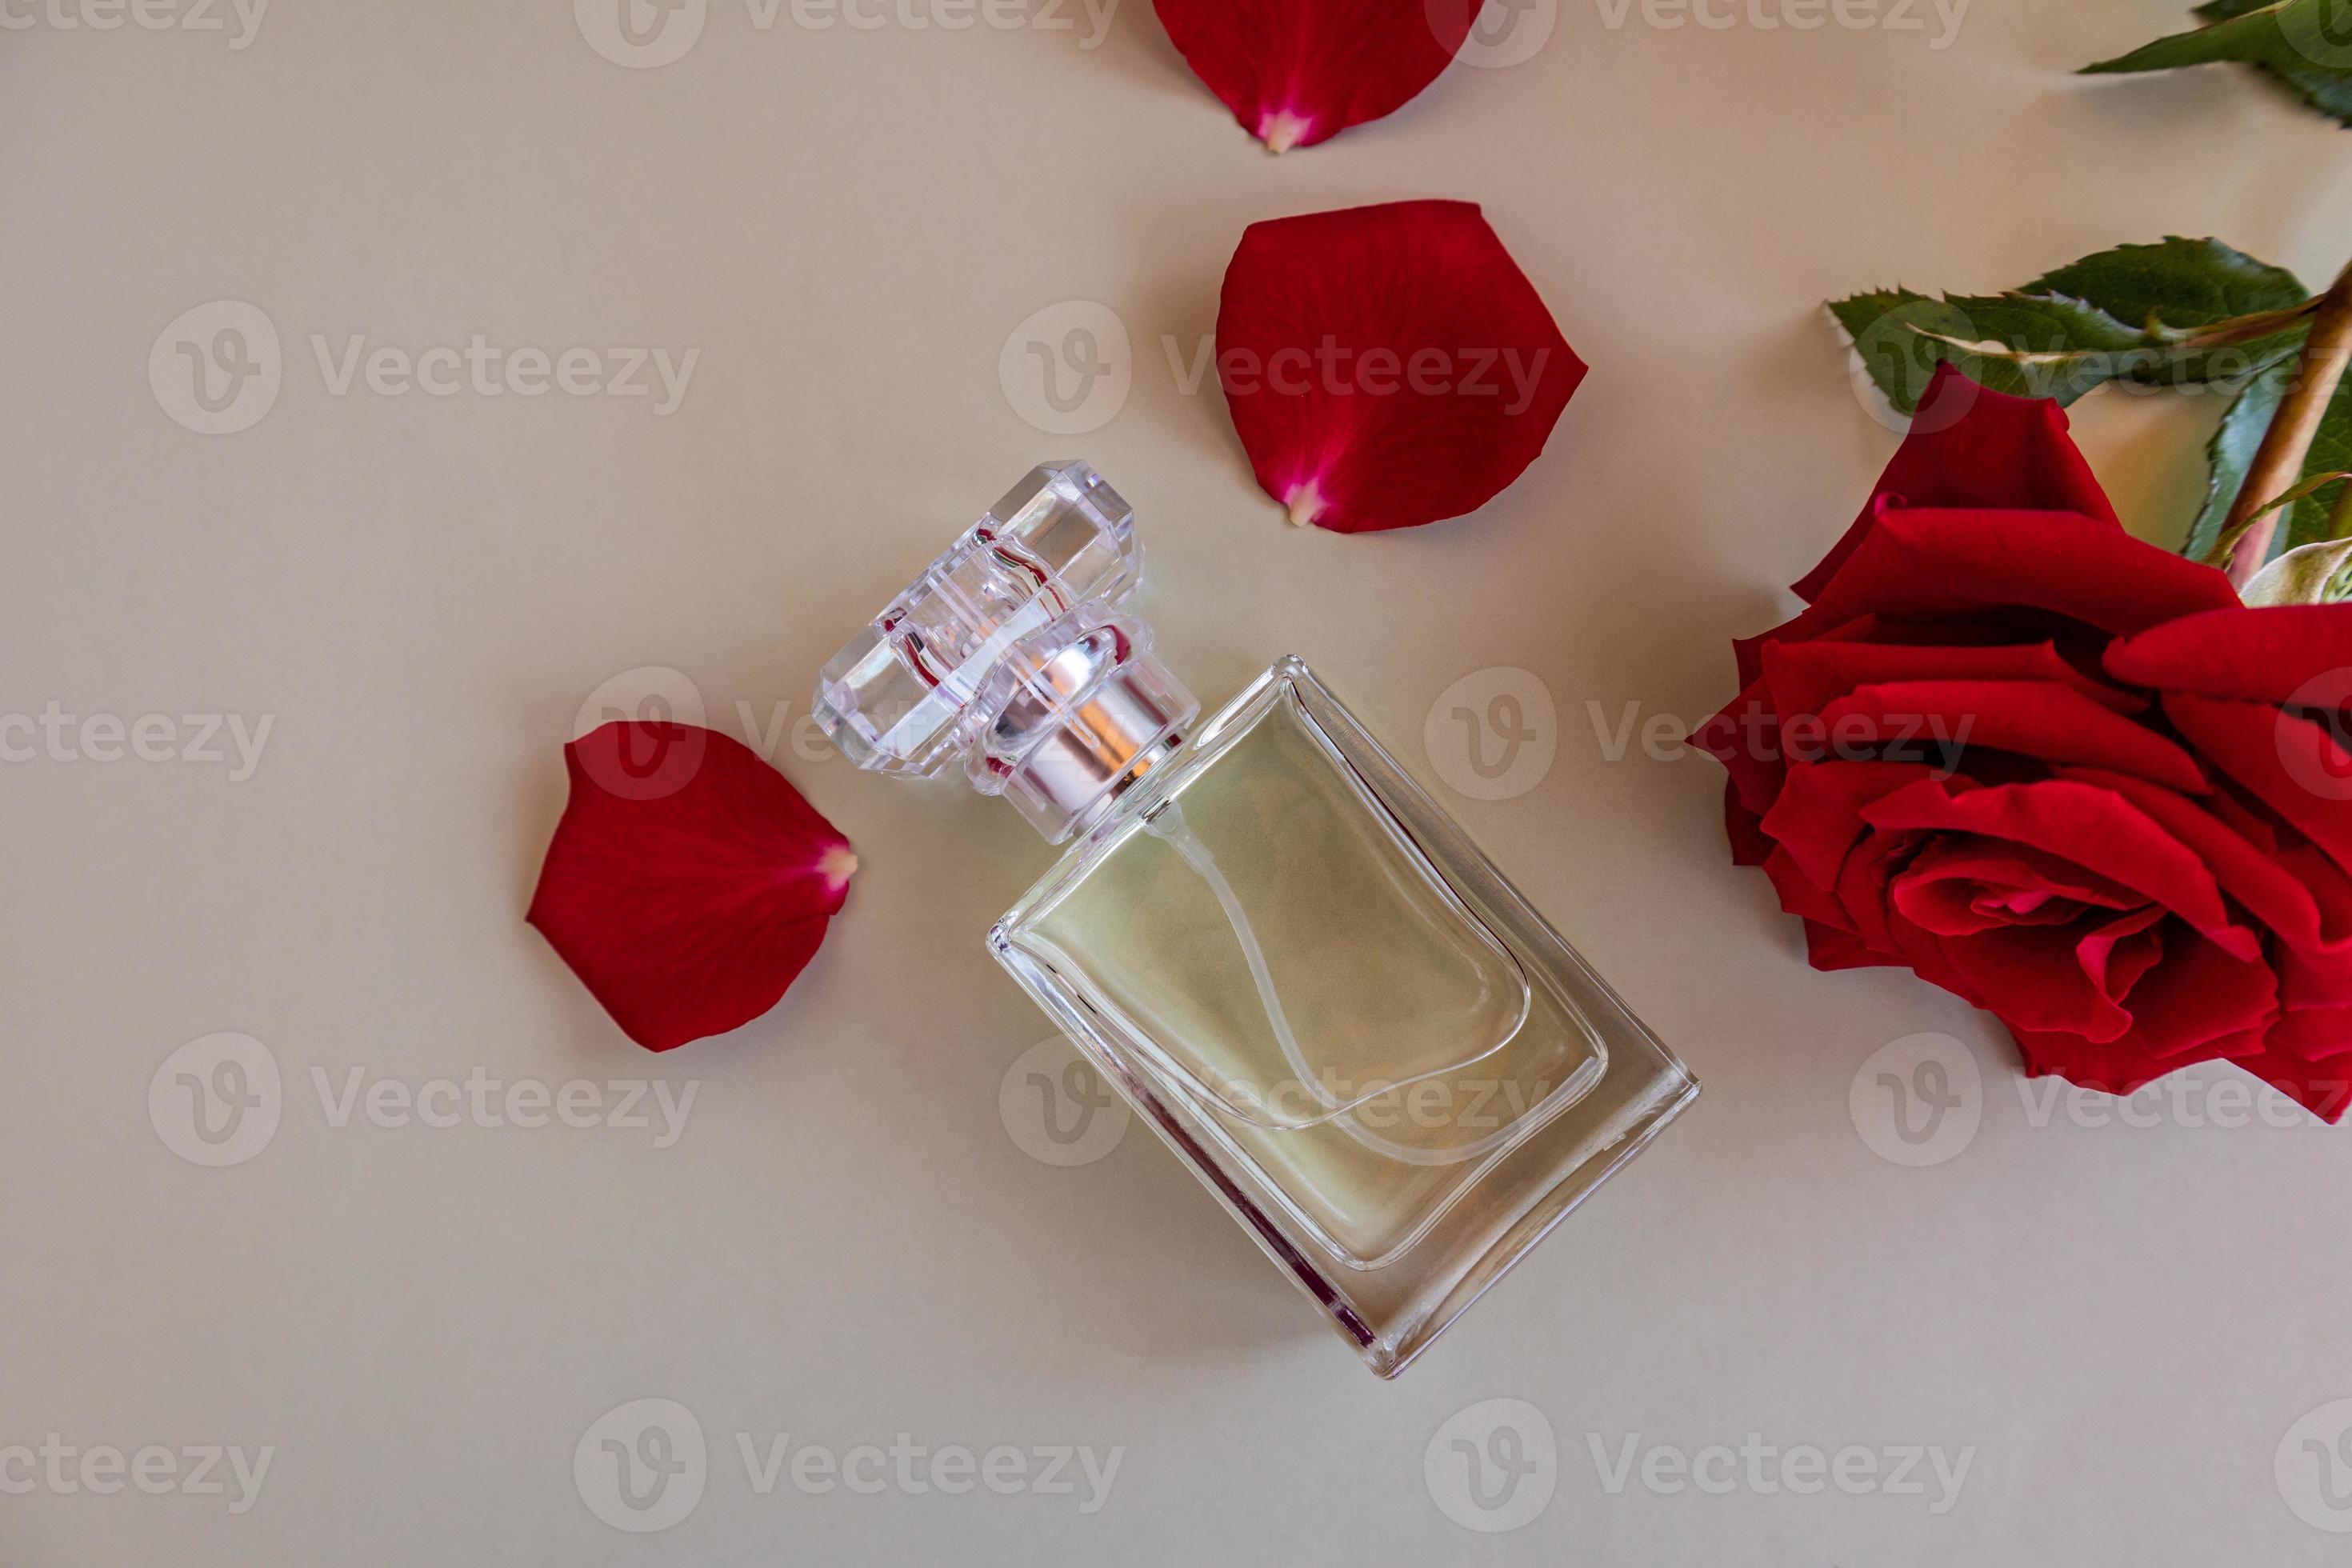 Perfume With Red Rose on Bottle: Scent of Elegance